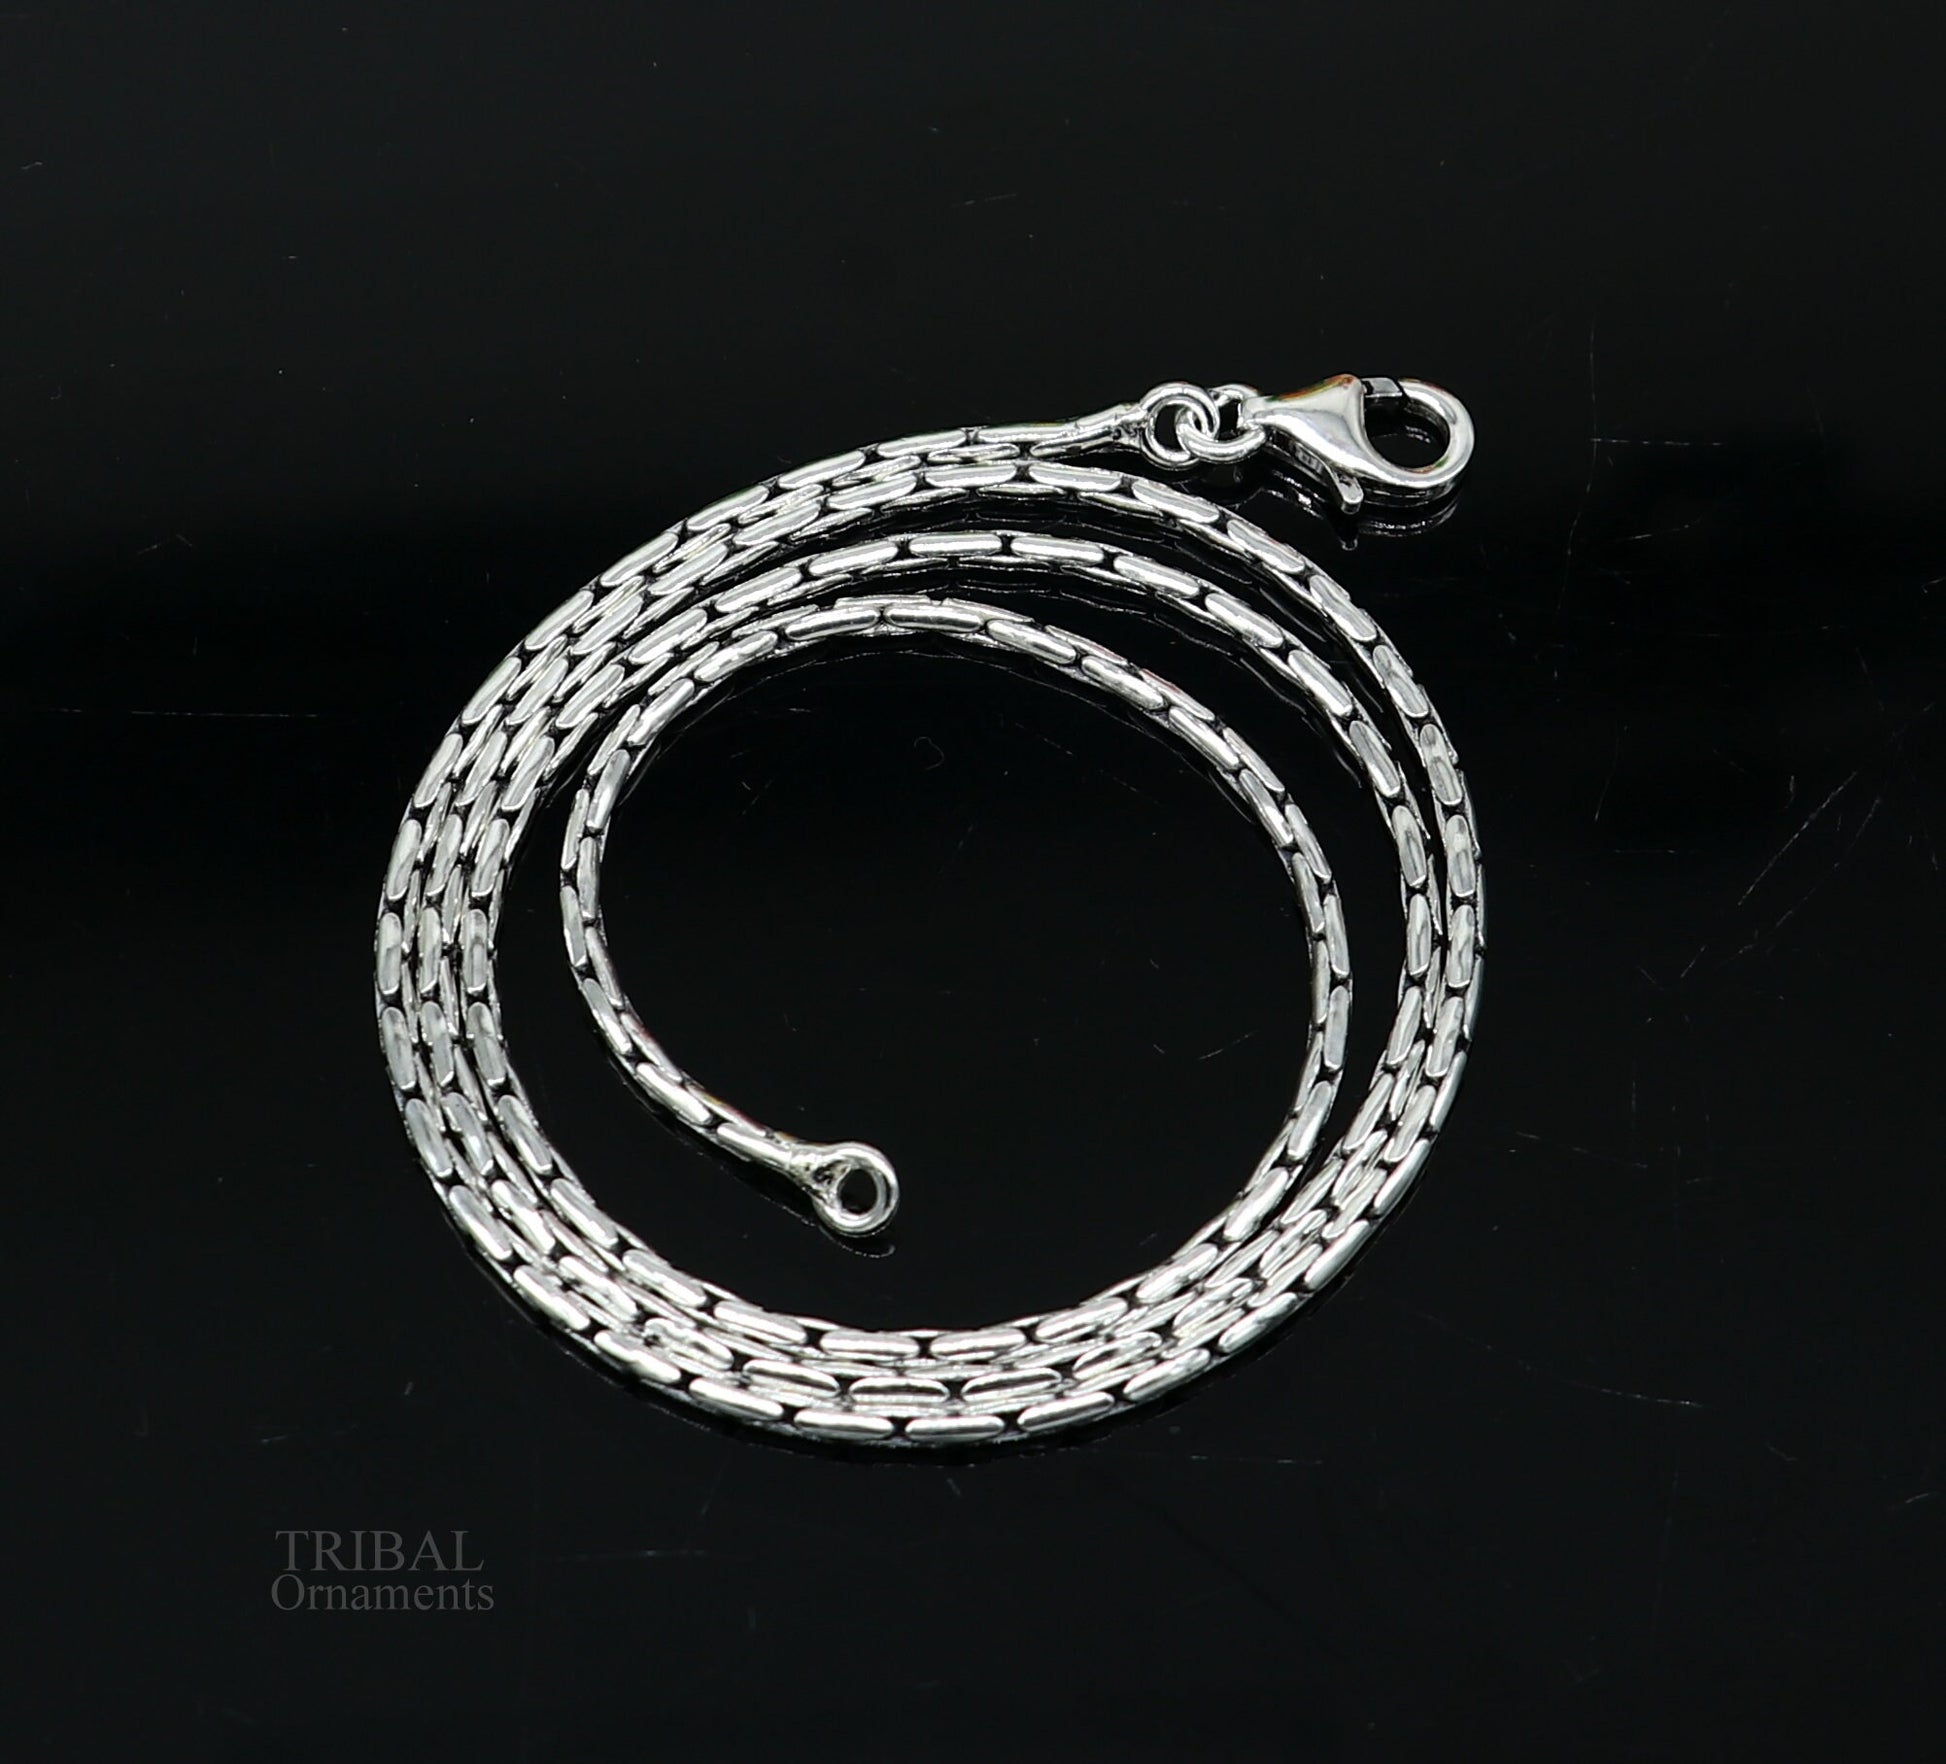 All size 925 sterling silver handmade solid fancy stylish silver beaded chain necklace baht chain best gifting jewelry from India ch151 - TRIBAL ORNAMENTS